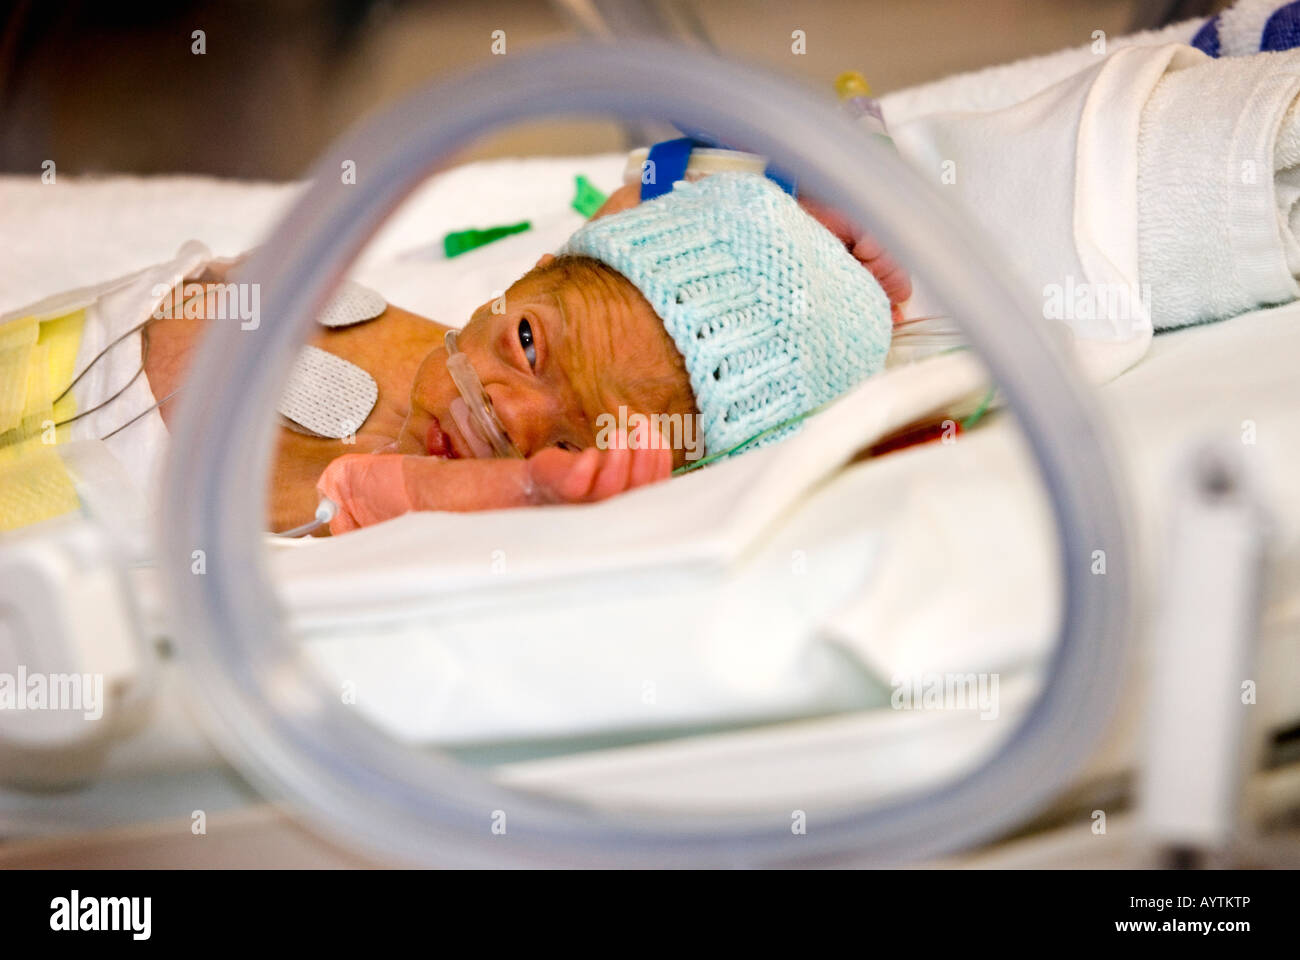 Premature baby in an incubator Stock Photo